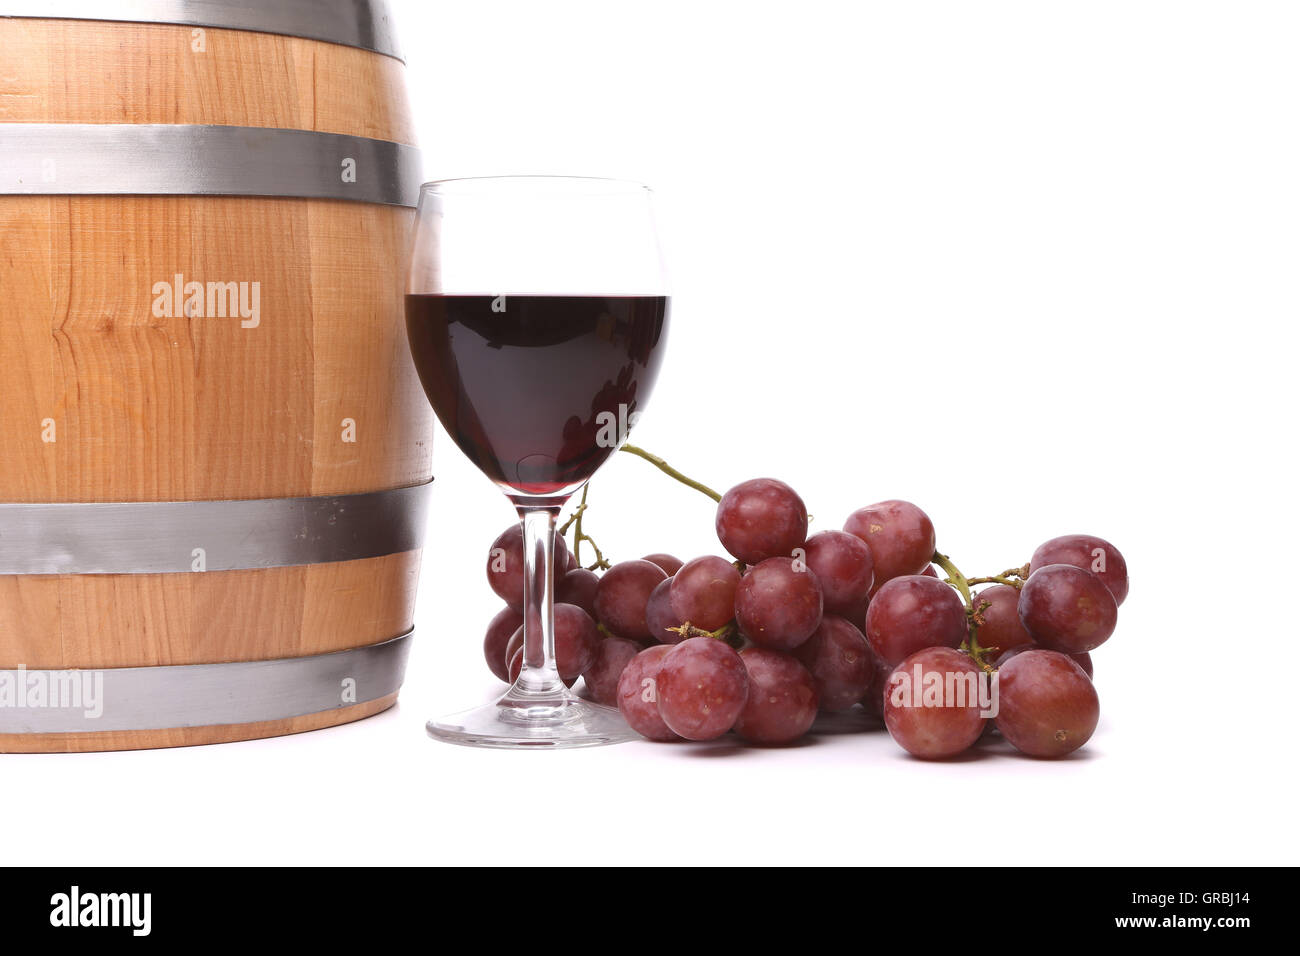 A glass of red wine with grapes and barrel. Stock Photo